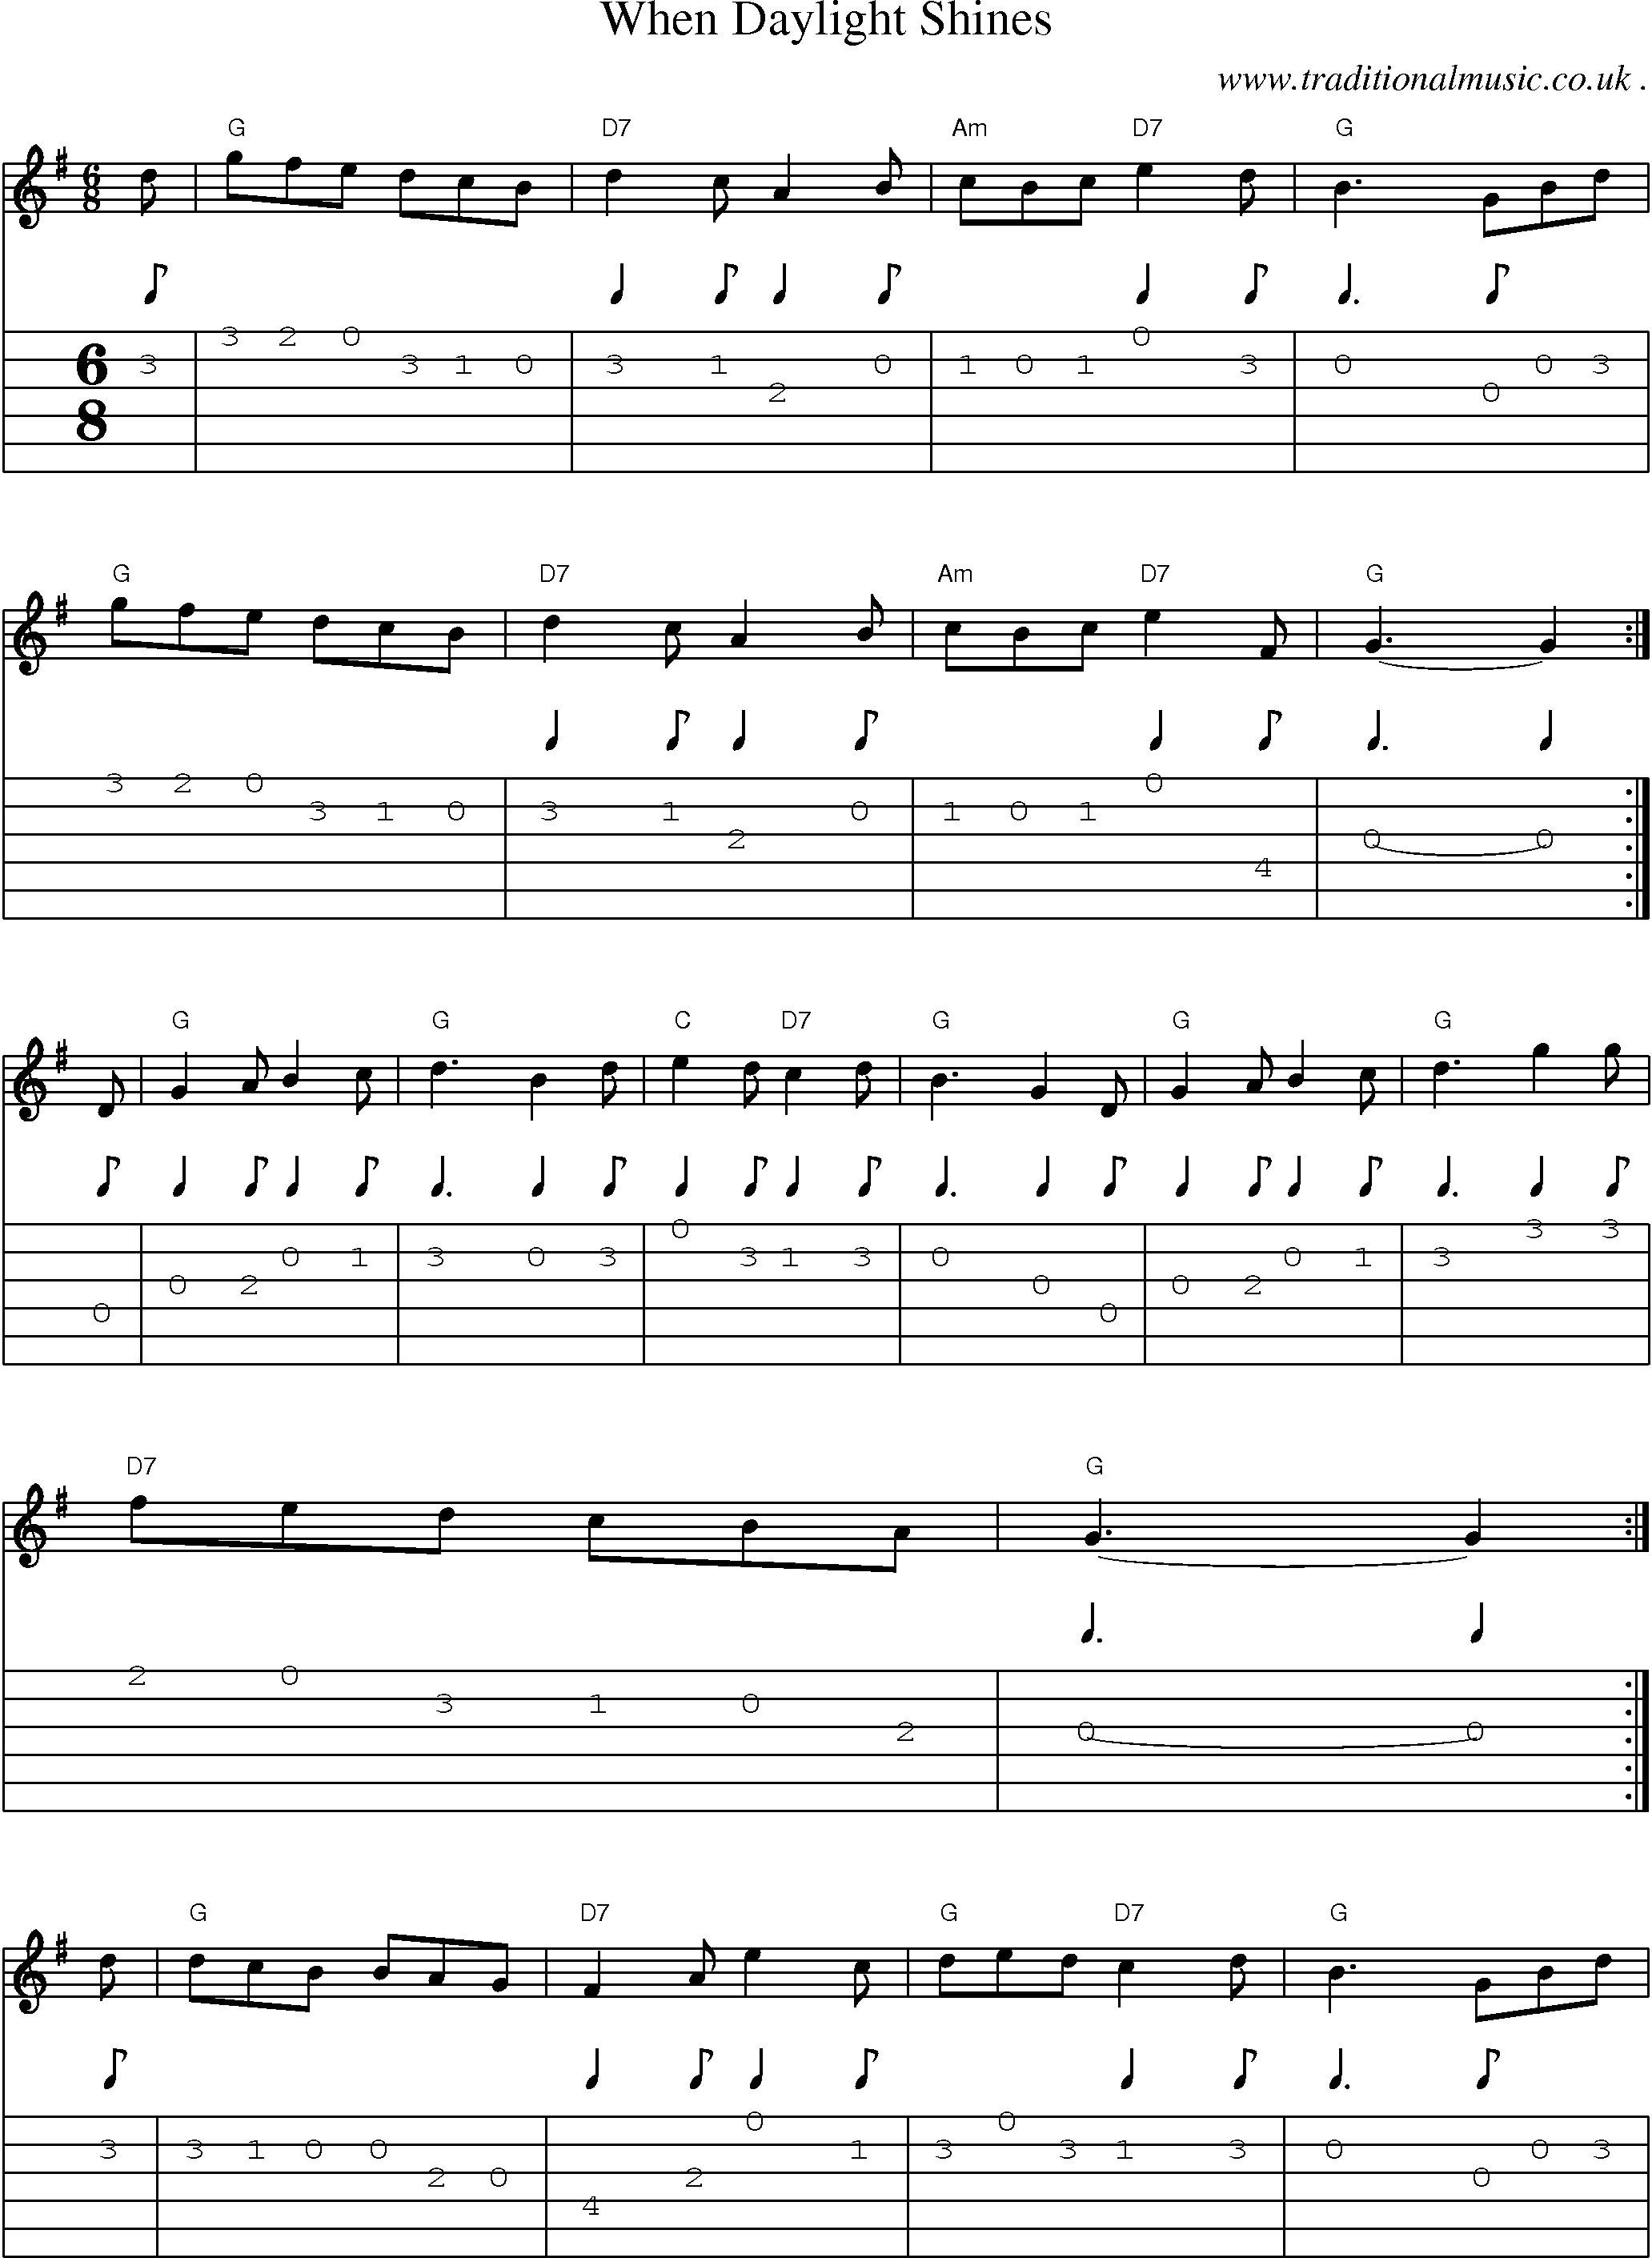 Sheet-Music and Guitar Tabs for When Daylight Shines